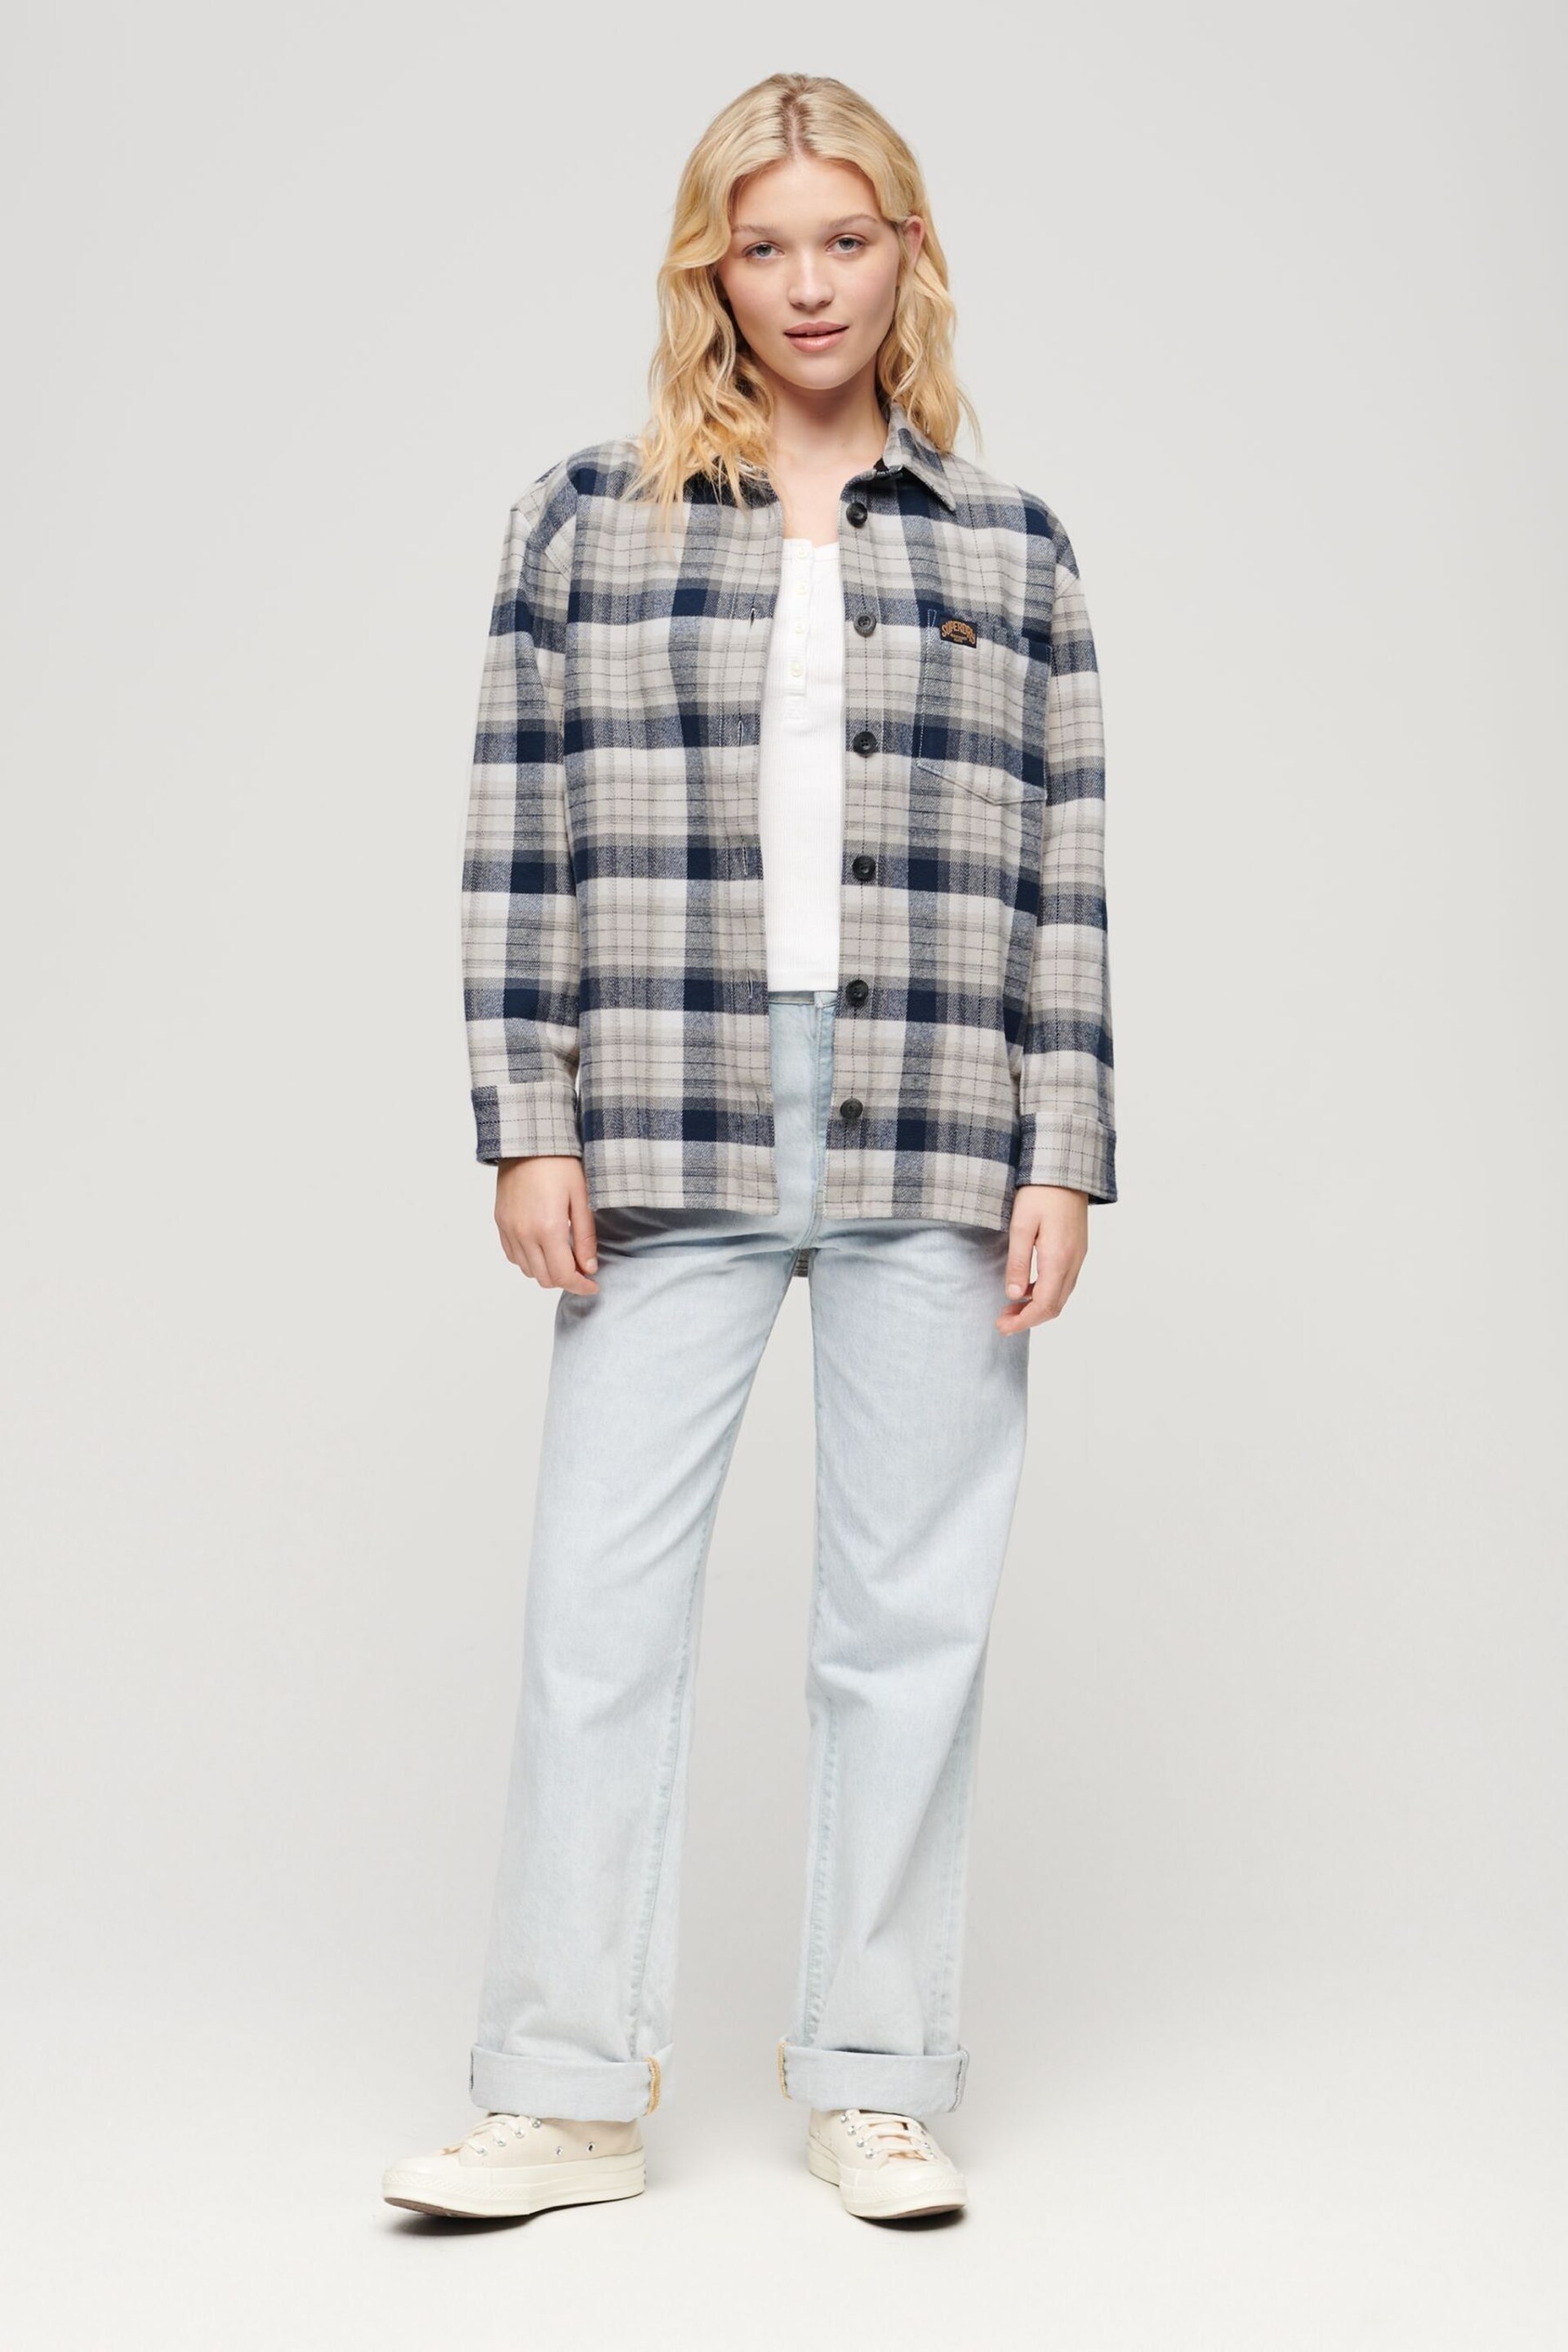 SUPERDRY Blue Check Flannel Overshirt - Image 2 of 3